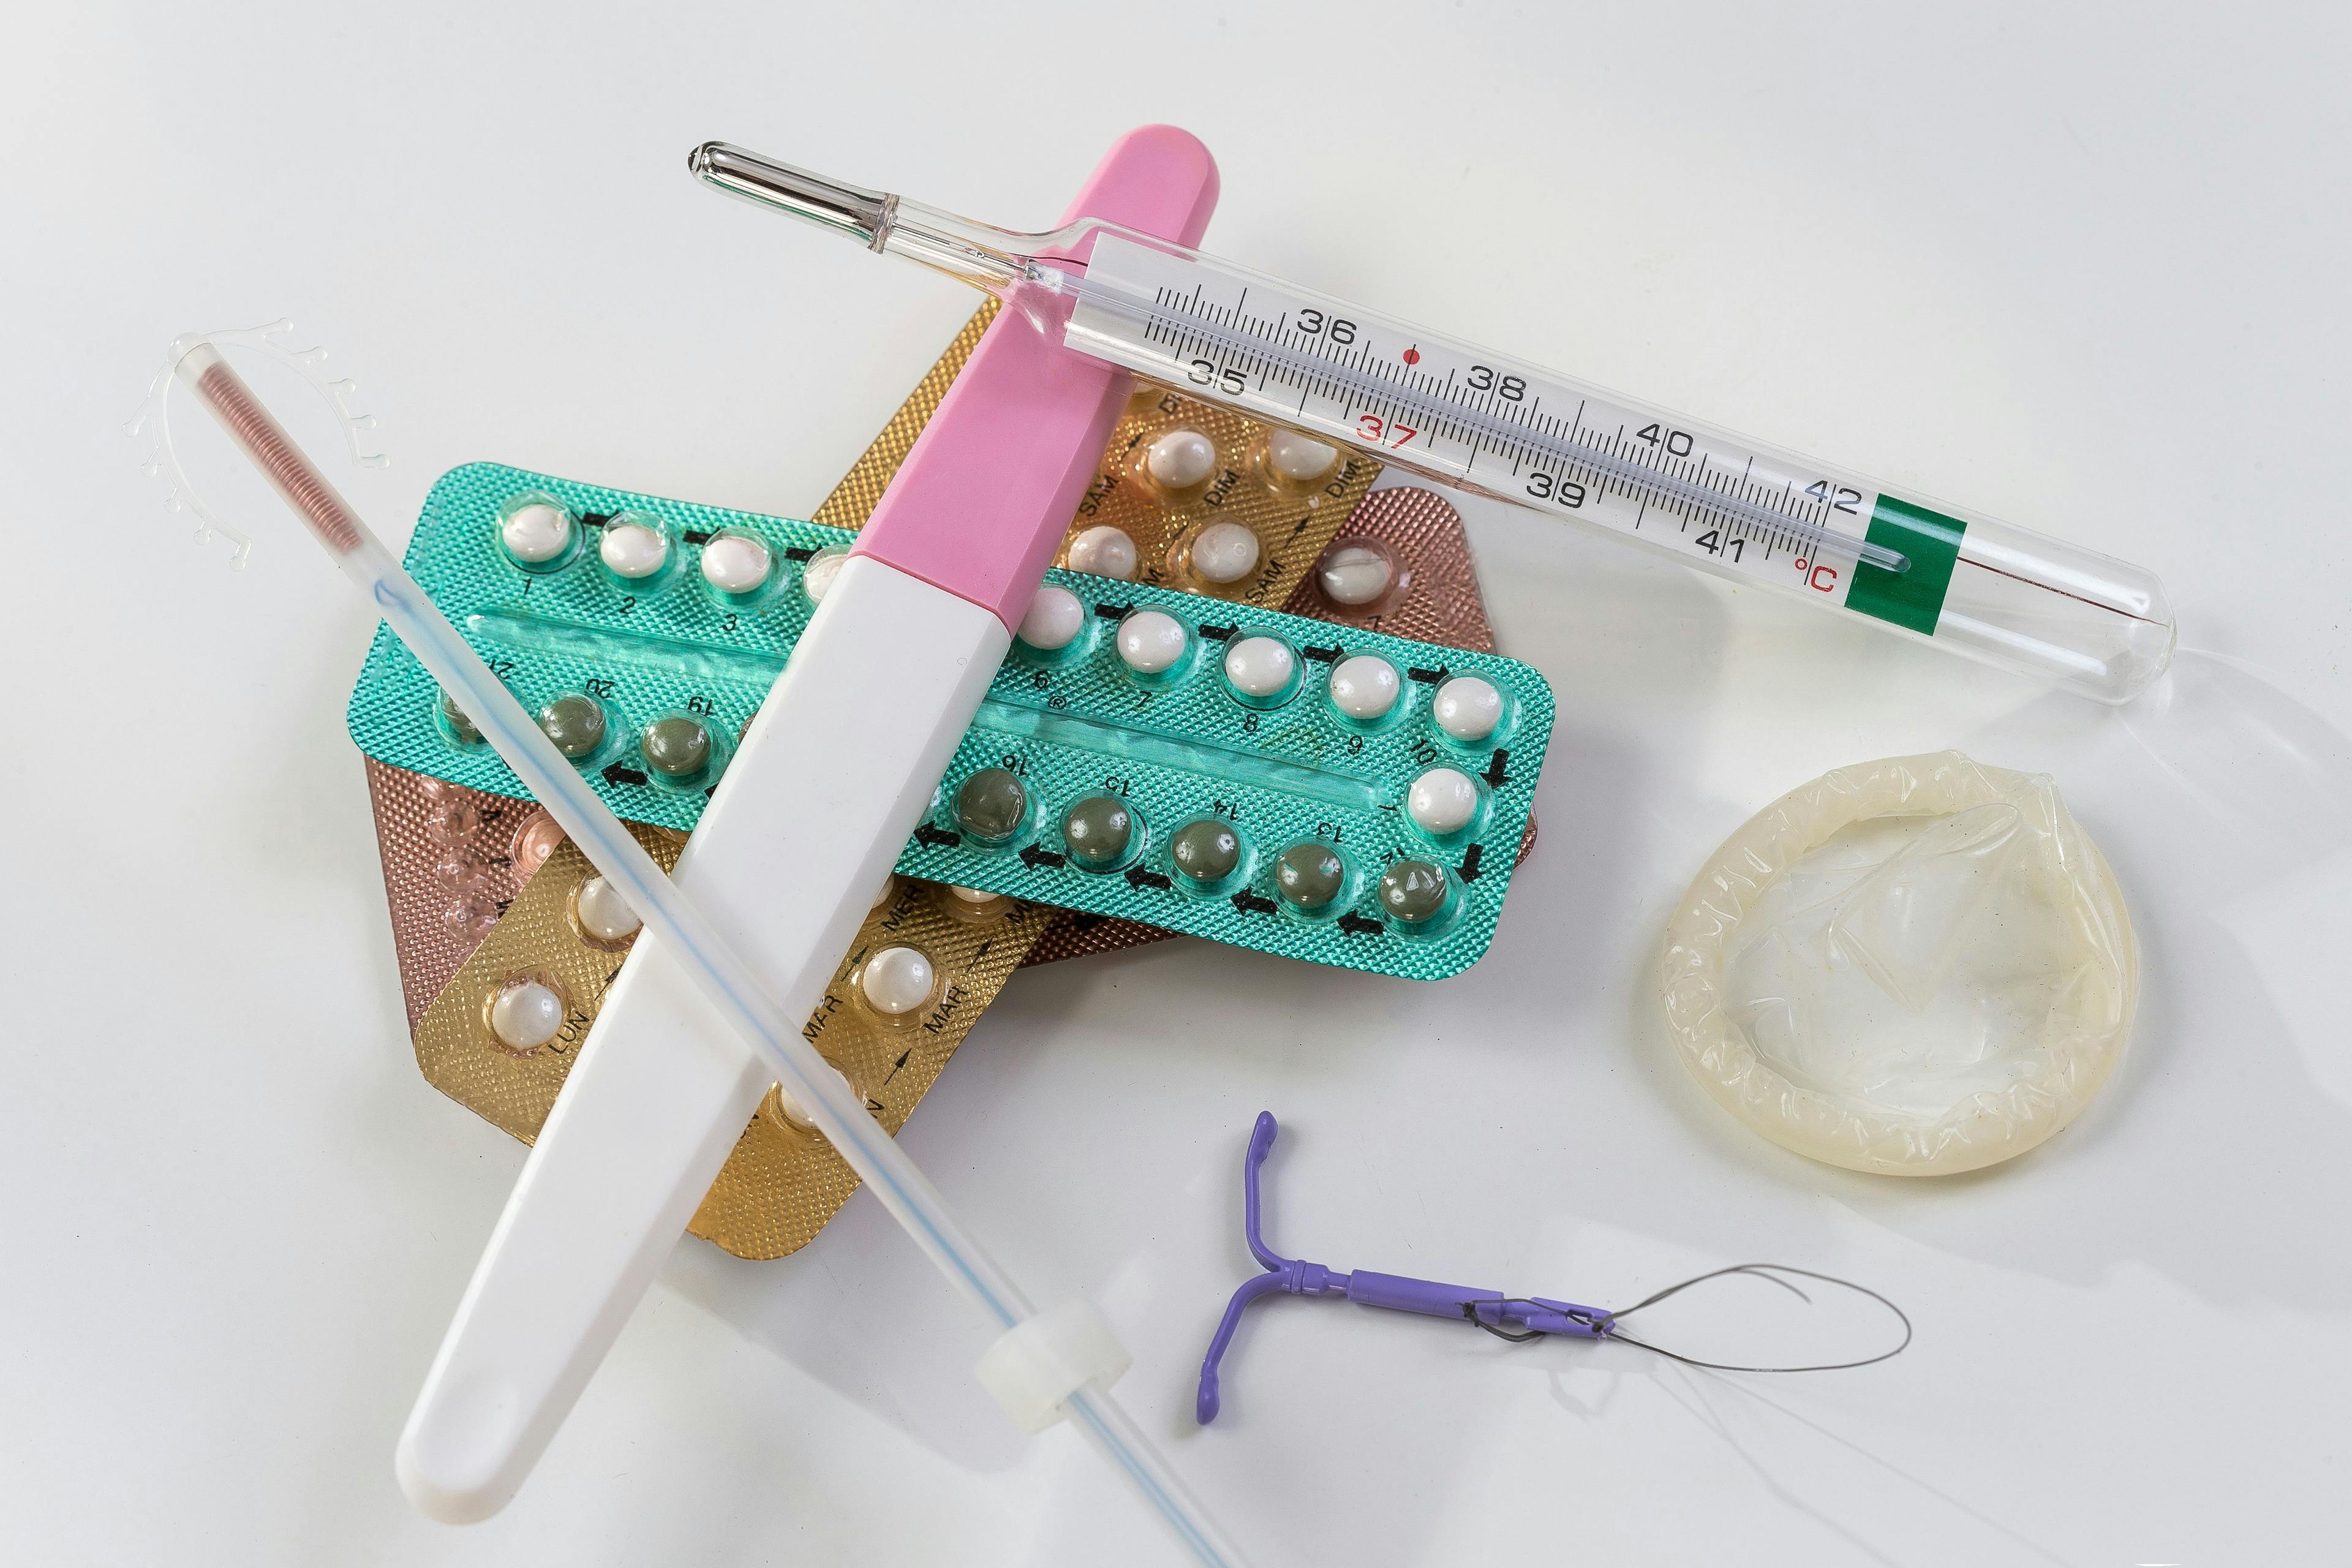 Contraception articles of 2022